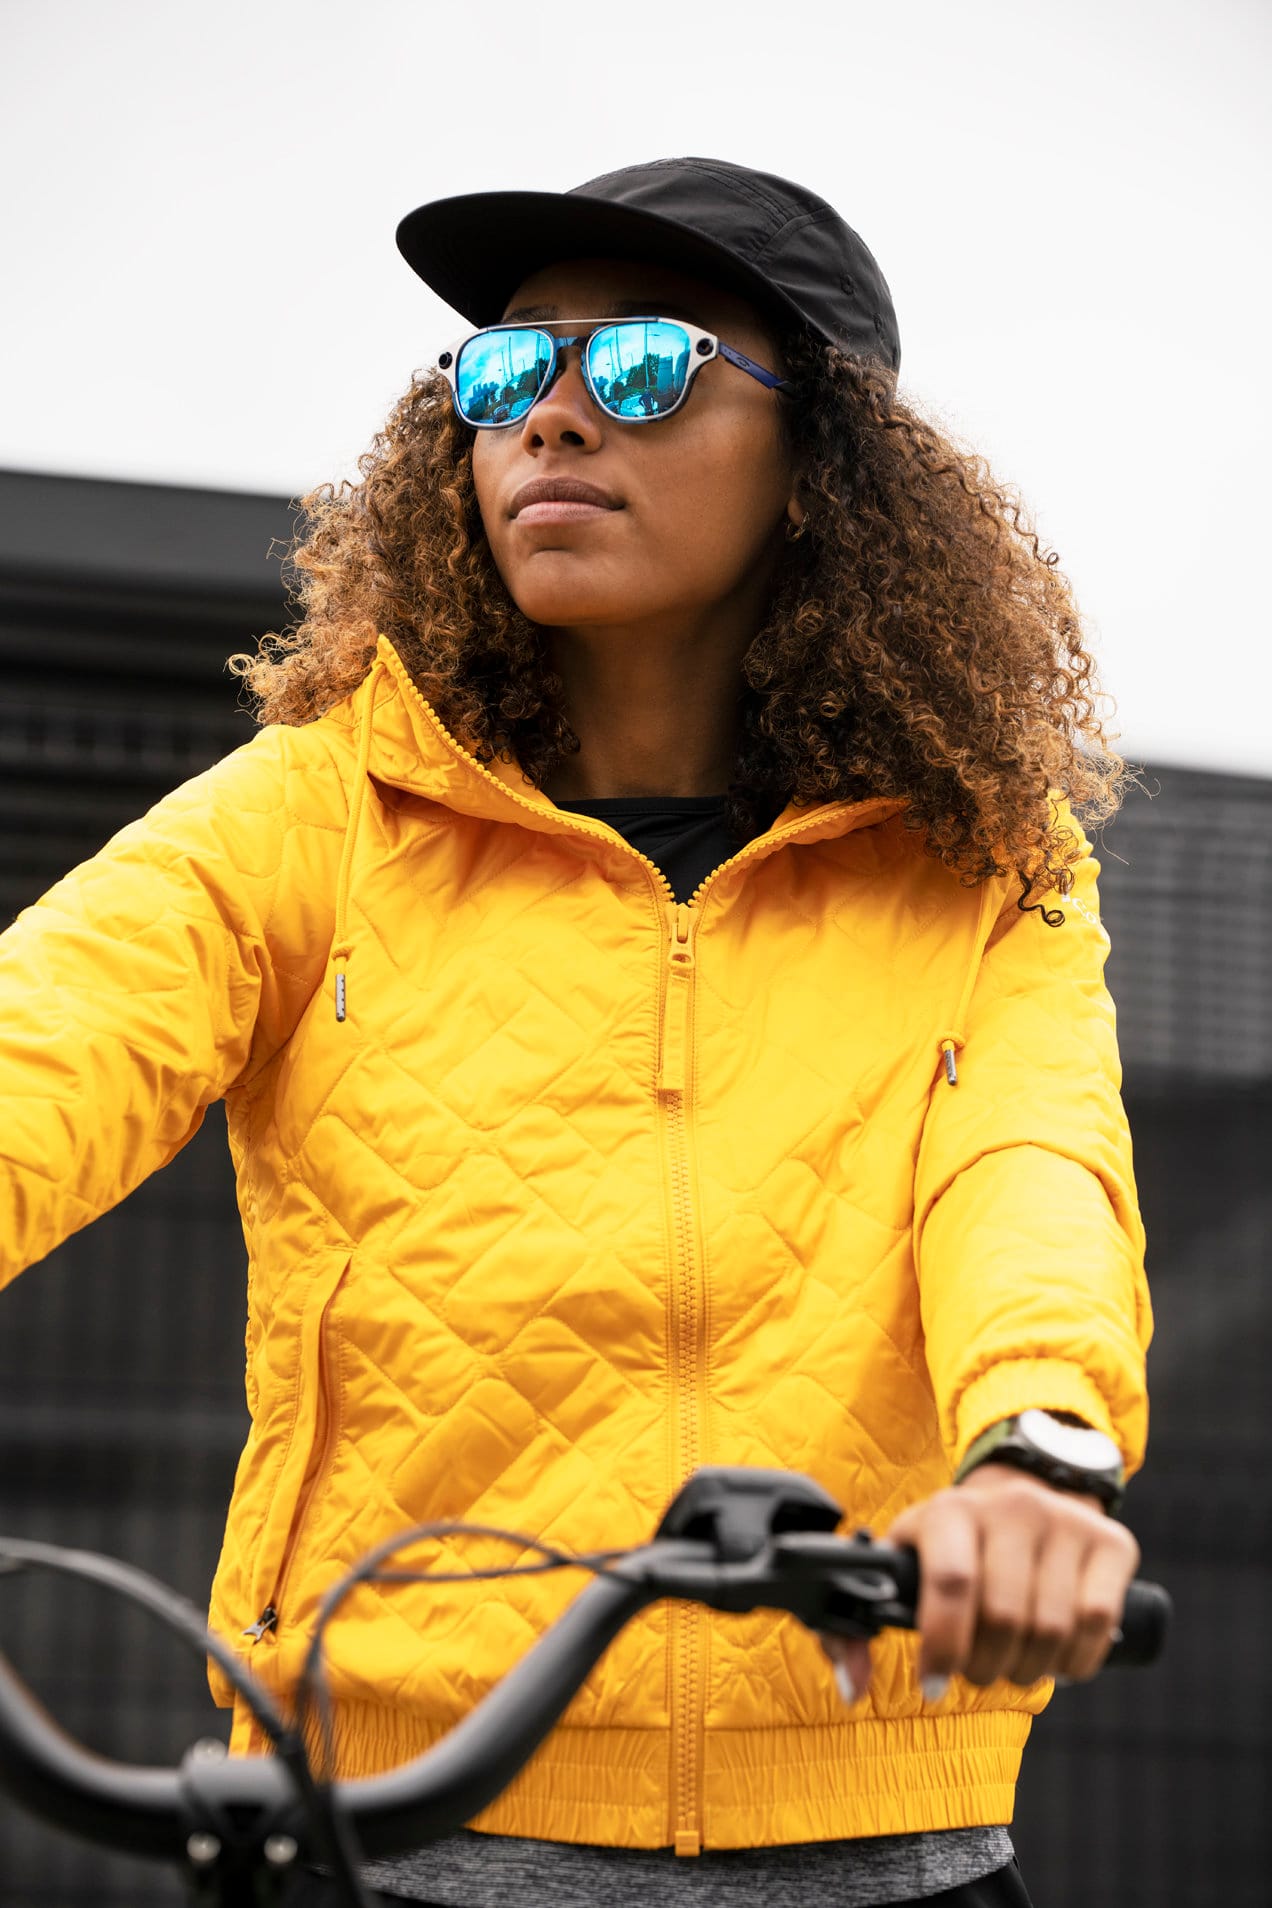 commuting by ebike clothes for Essential